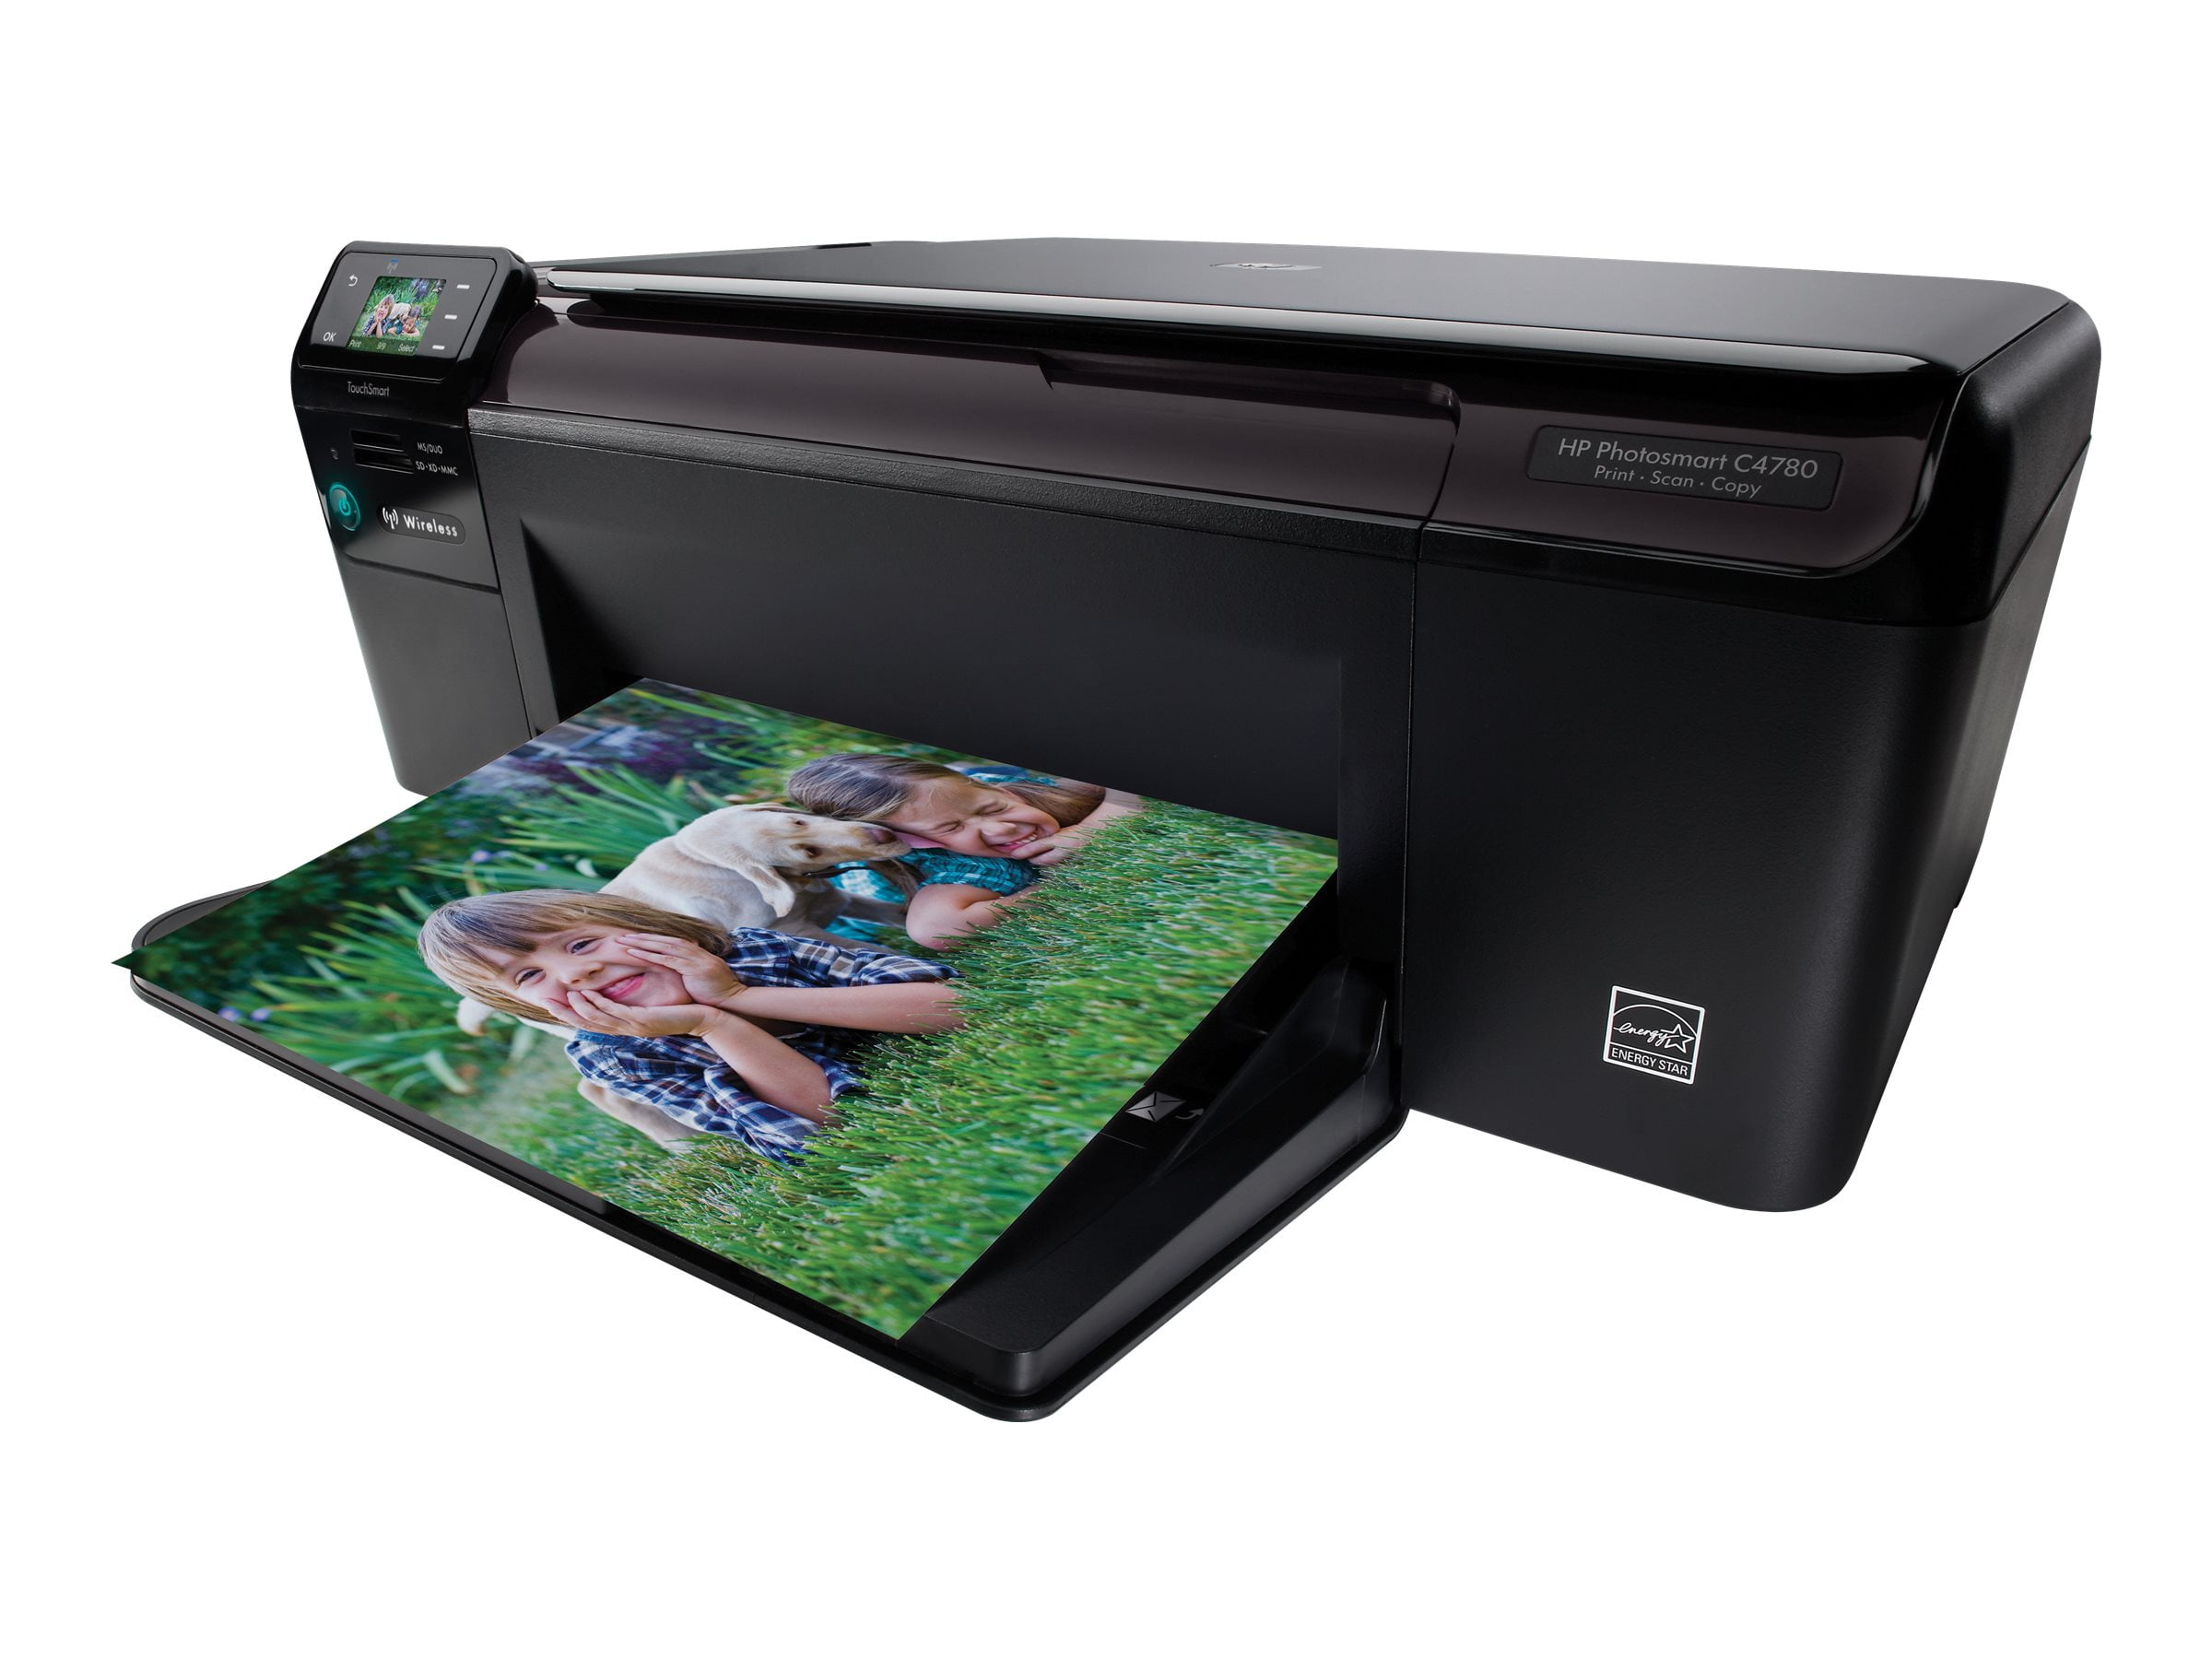 HP Photosmart C4780 All-in-One - Multifunction printer - color - ink-jet - Letter Size (8.5 in 11 (original) - 8.5 in x 30 in (media) - to 9